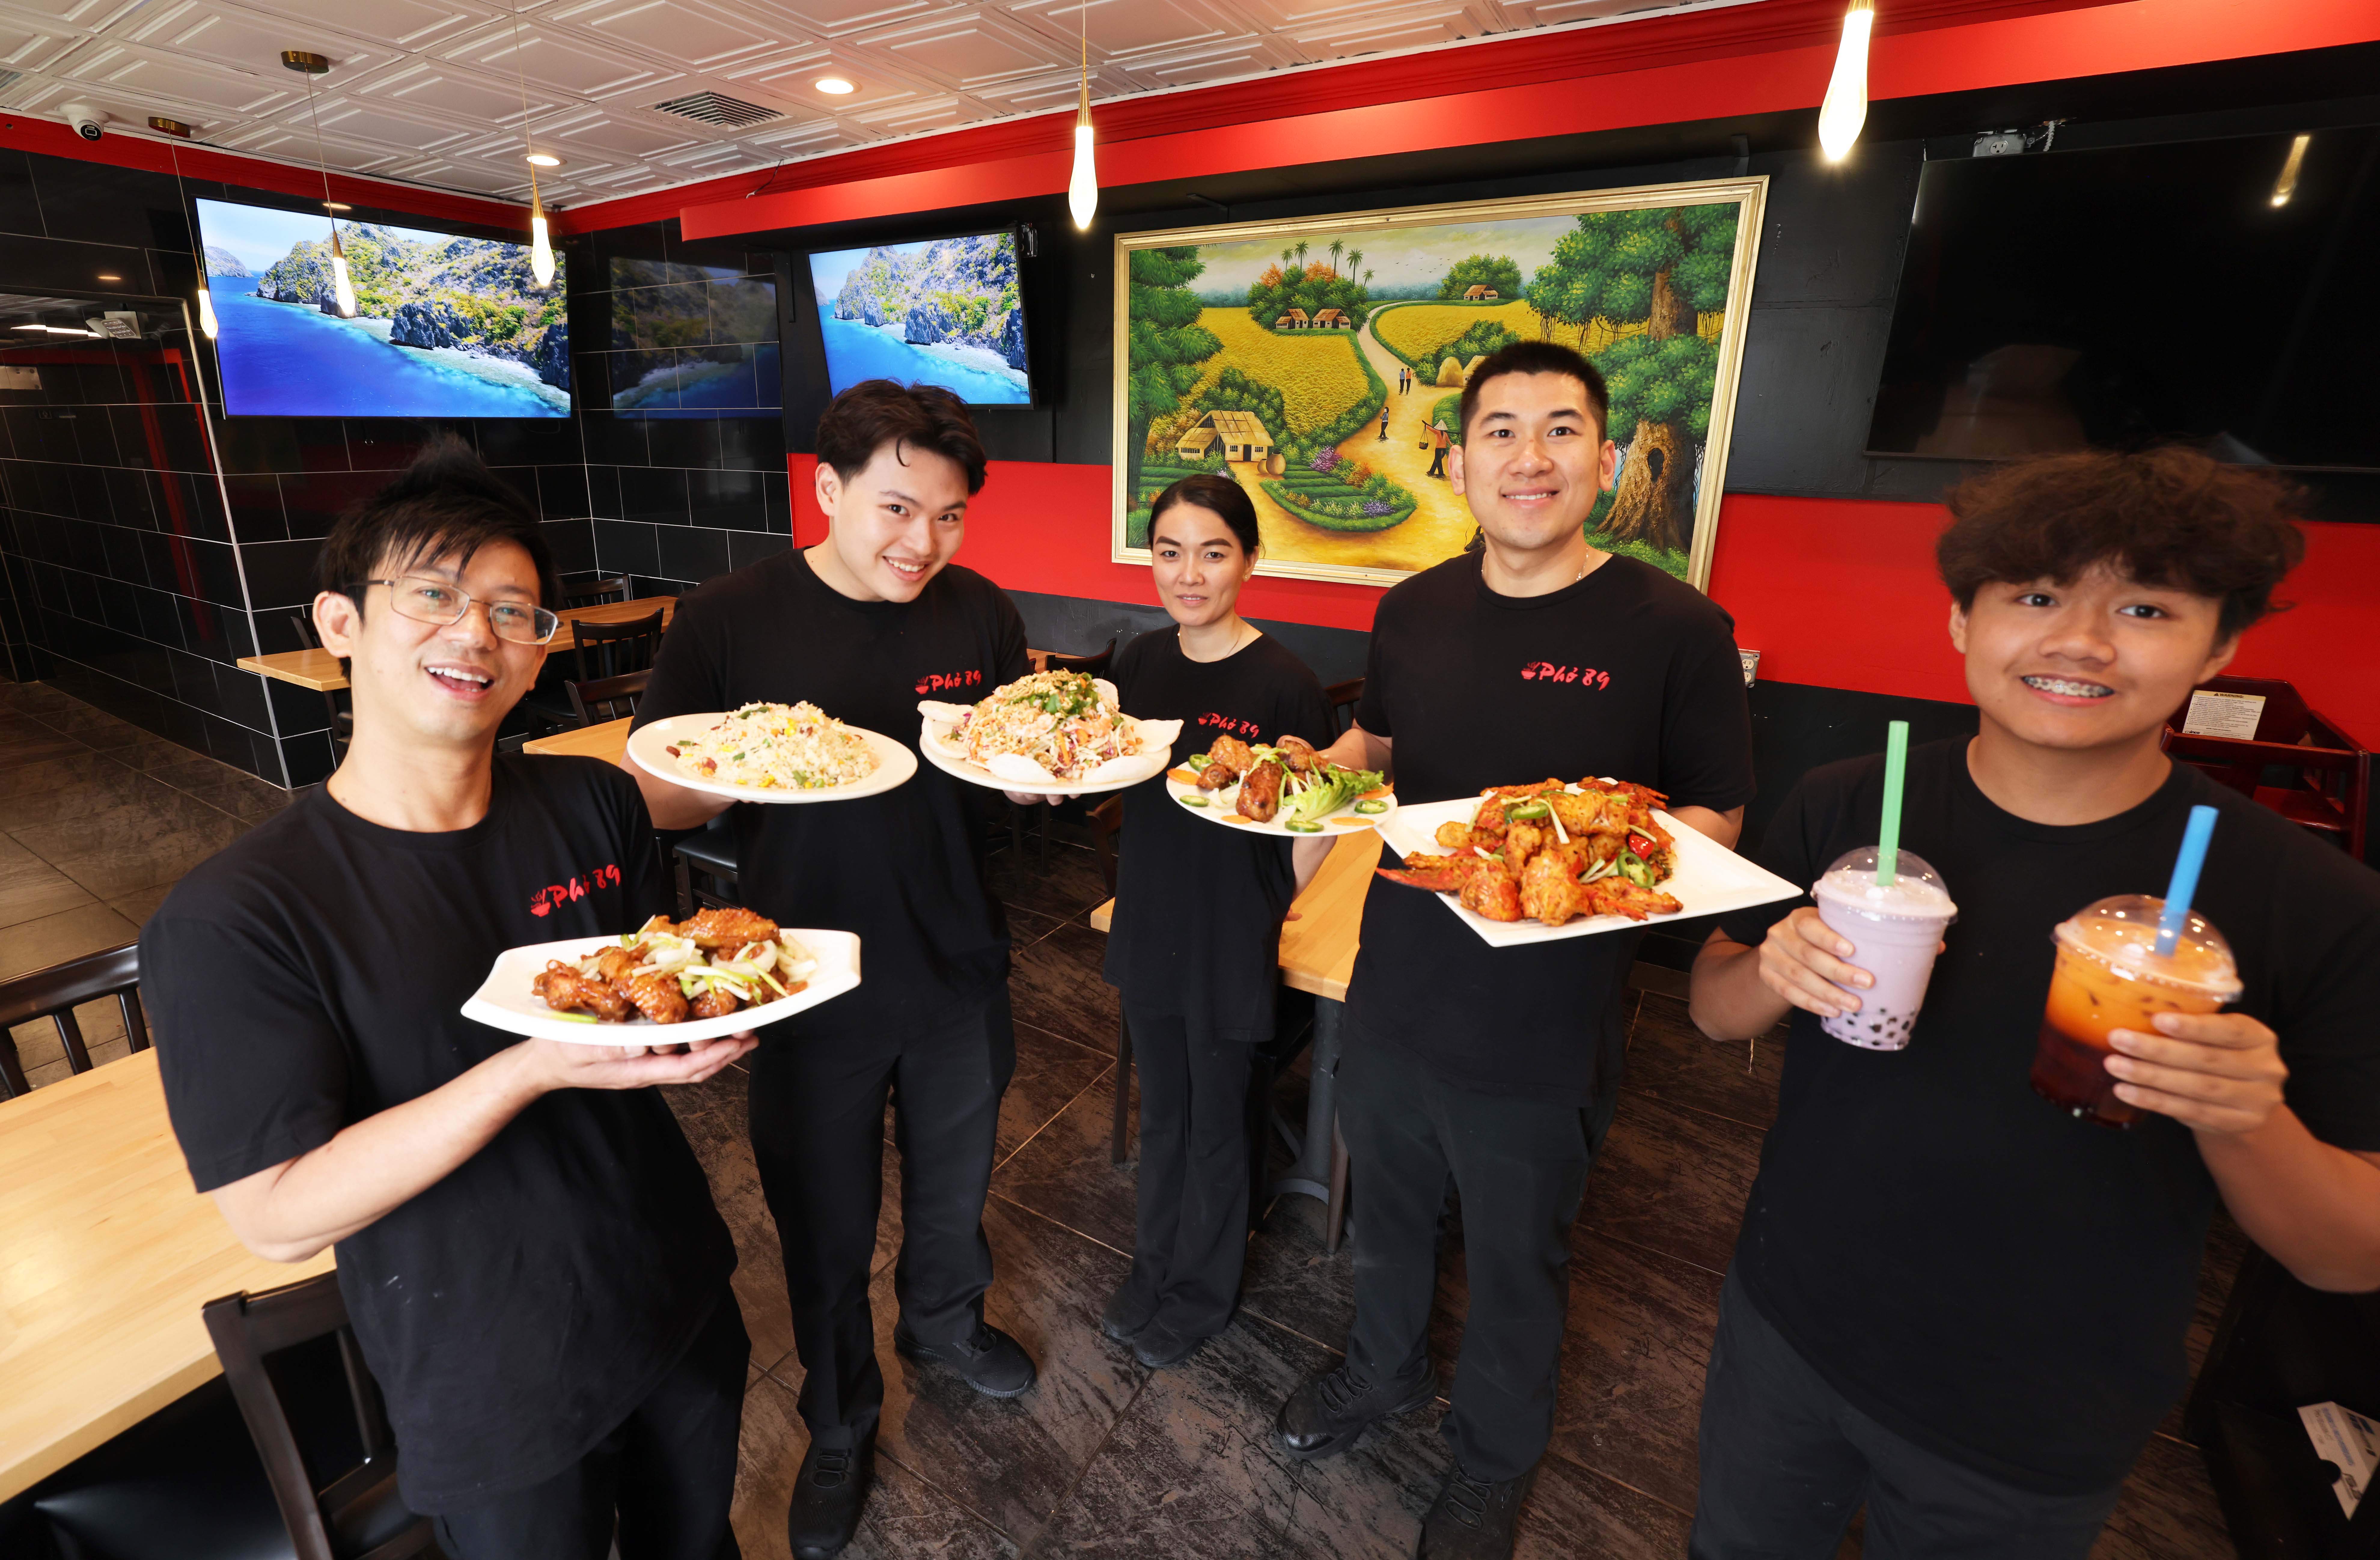 Pan-fried lobster, spring rolls: Jump into authentic Vietnamese flavors at Brockton's Pho 89